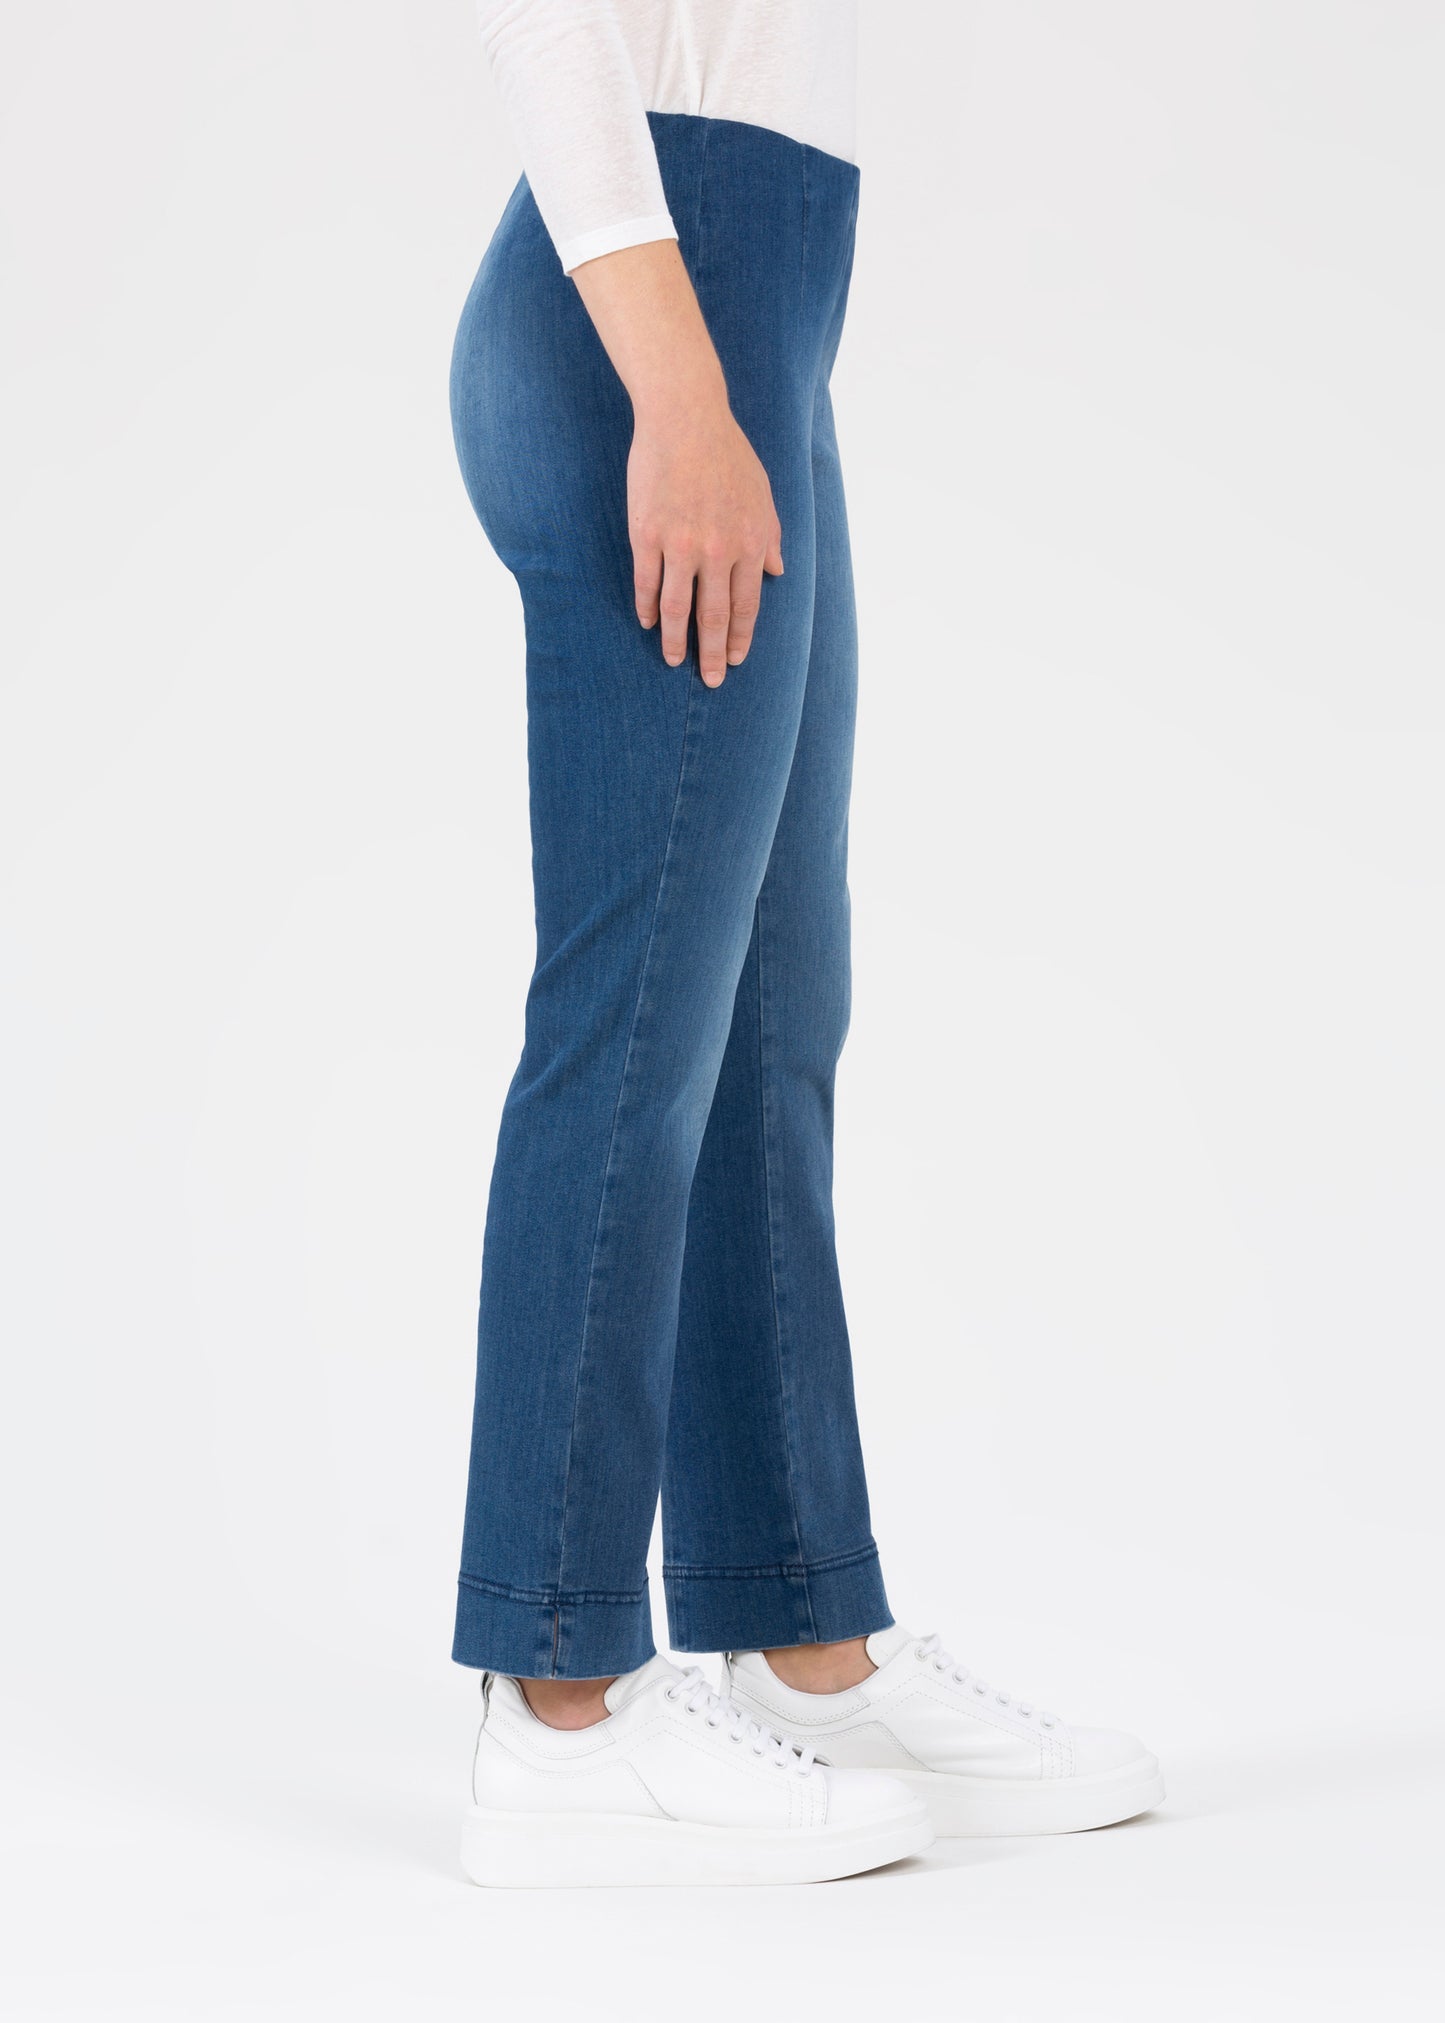 Stehmann Ina jeans with straight legs